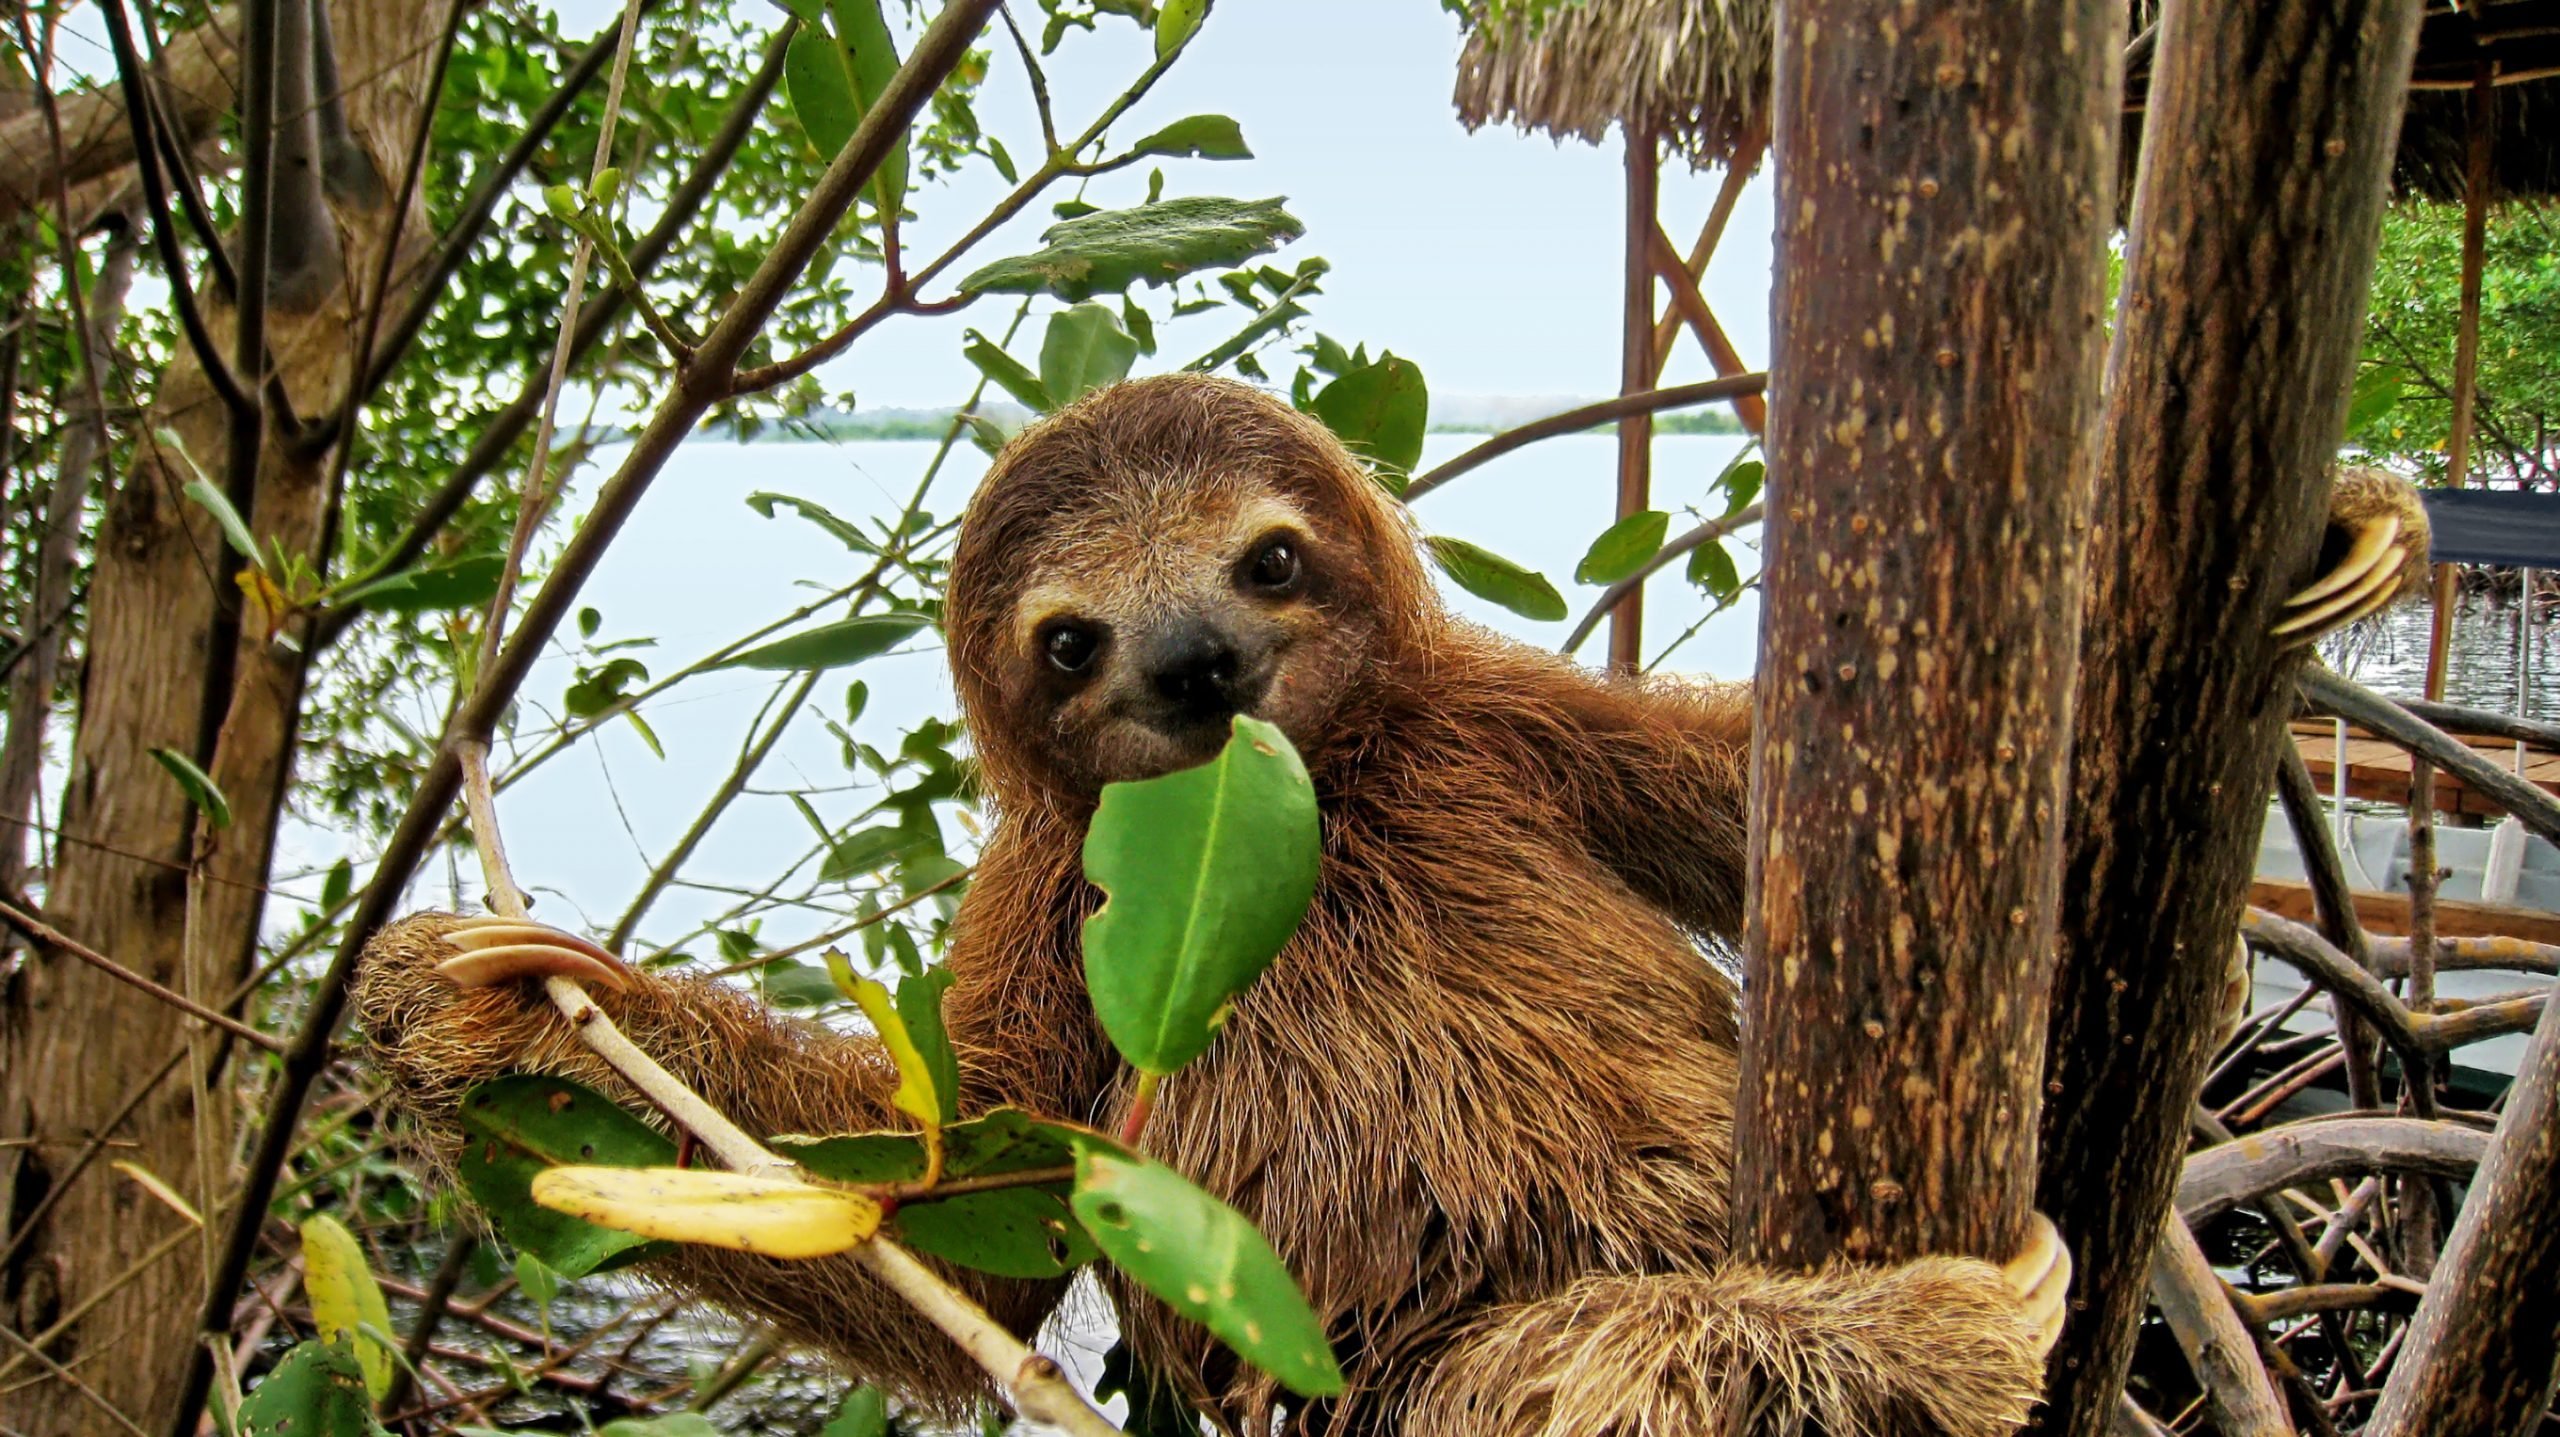 40 Adorable Sloth Pictures You Need in Your Life | Reader's Digest